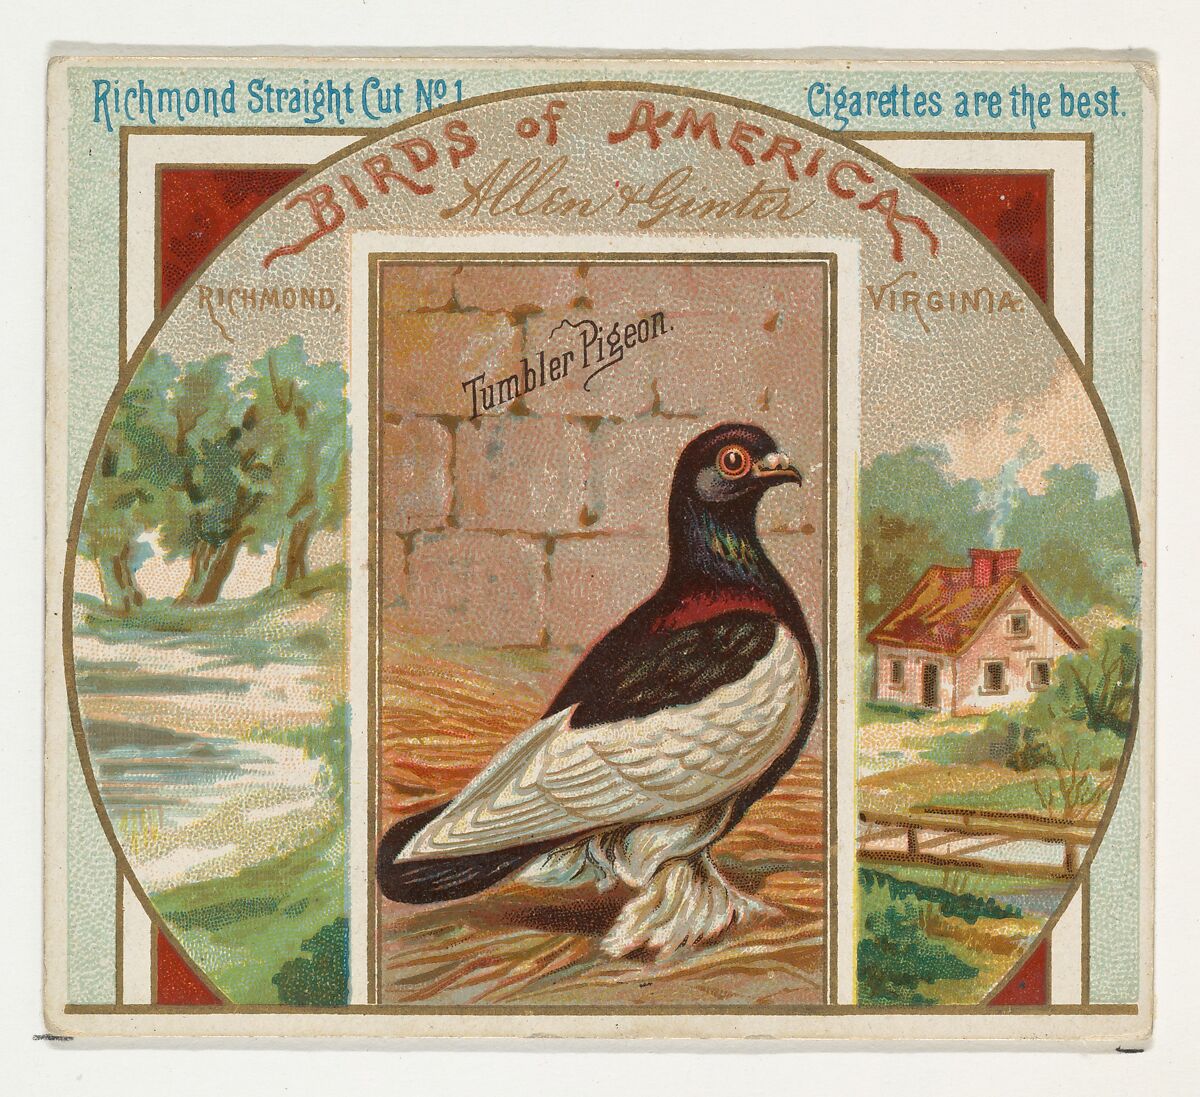 Tumbler Pigeon, from the Birds of America series (N37) for Allen & Ginter Cigarettes, Issued by Allen &amp; Ginter (American, Richmond, Virginia), Commercial color lithograph 